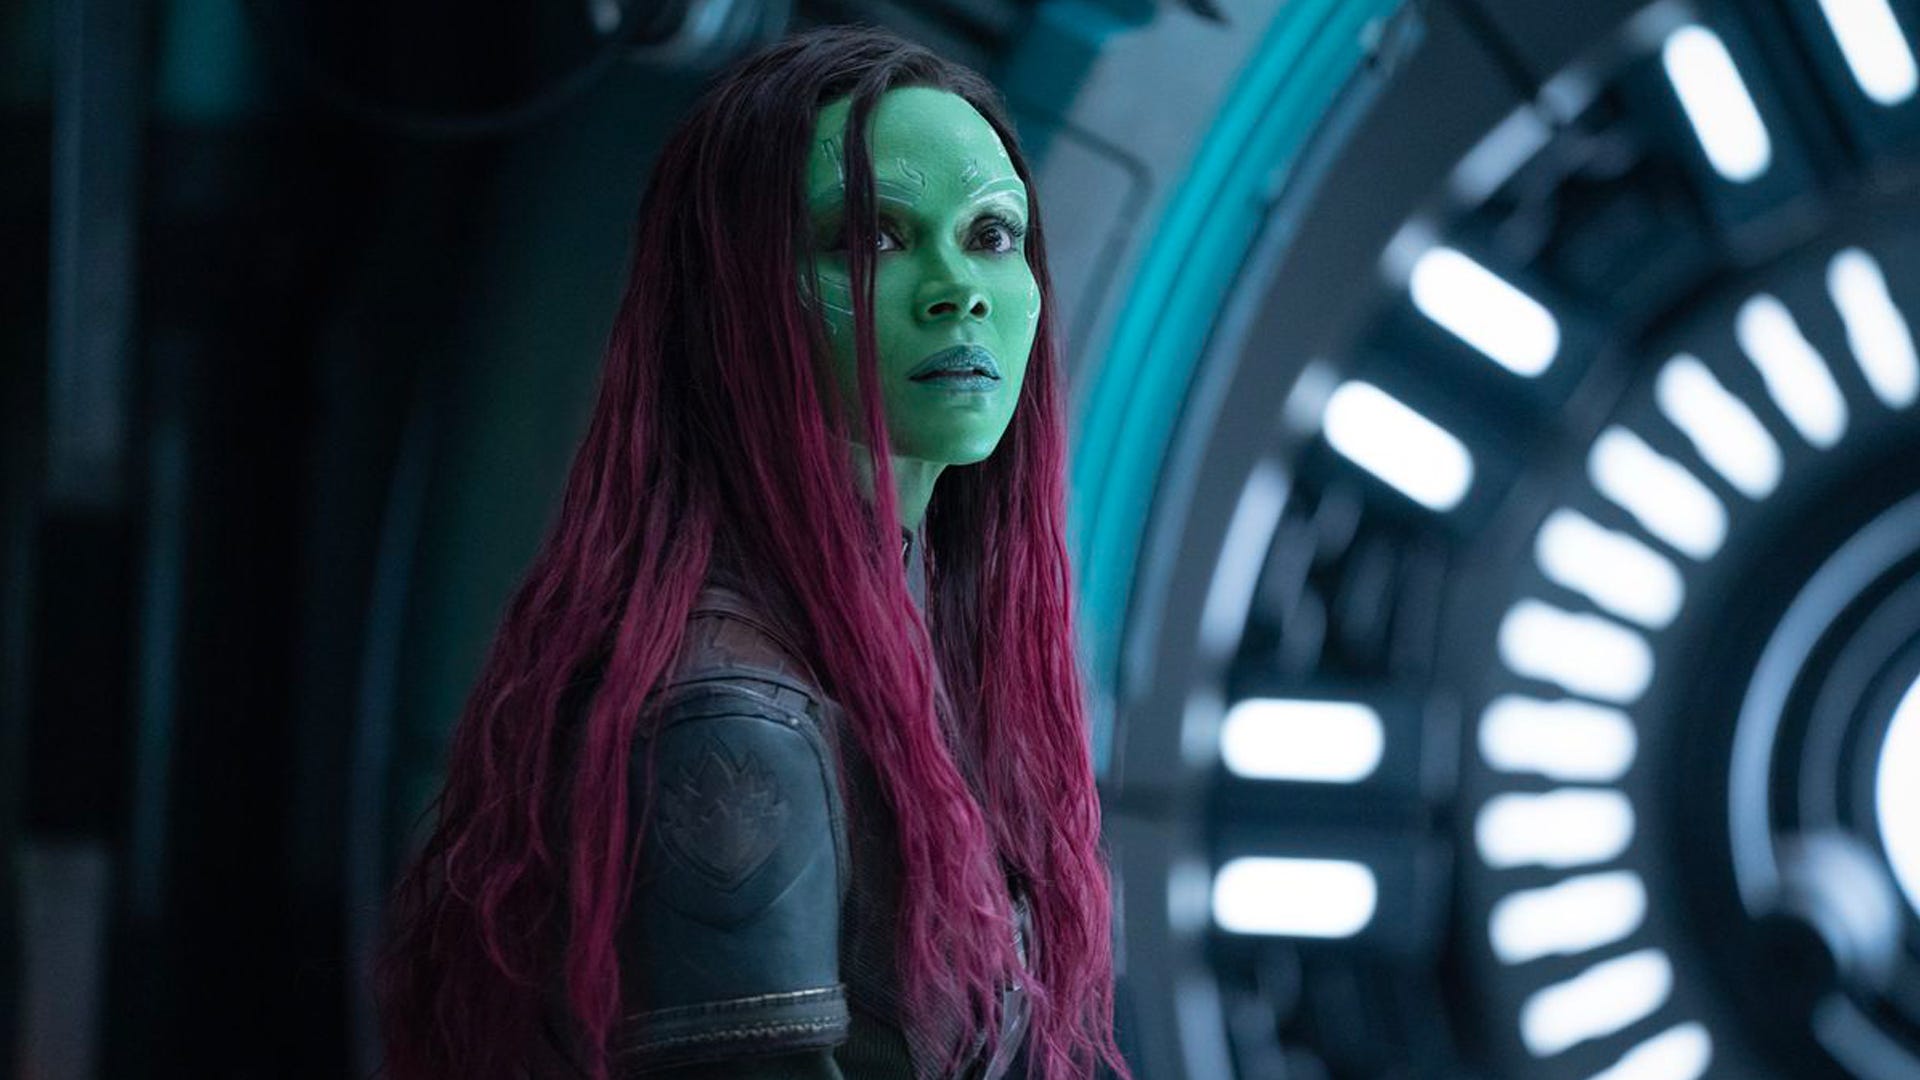 Zoe Saldaña thinks it would be a "huge loss" if Marvel didn't make more Guardians of the Galaxy films, but it's probably for the best it doesn't